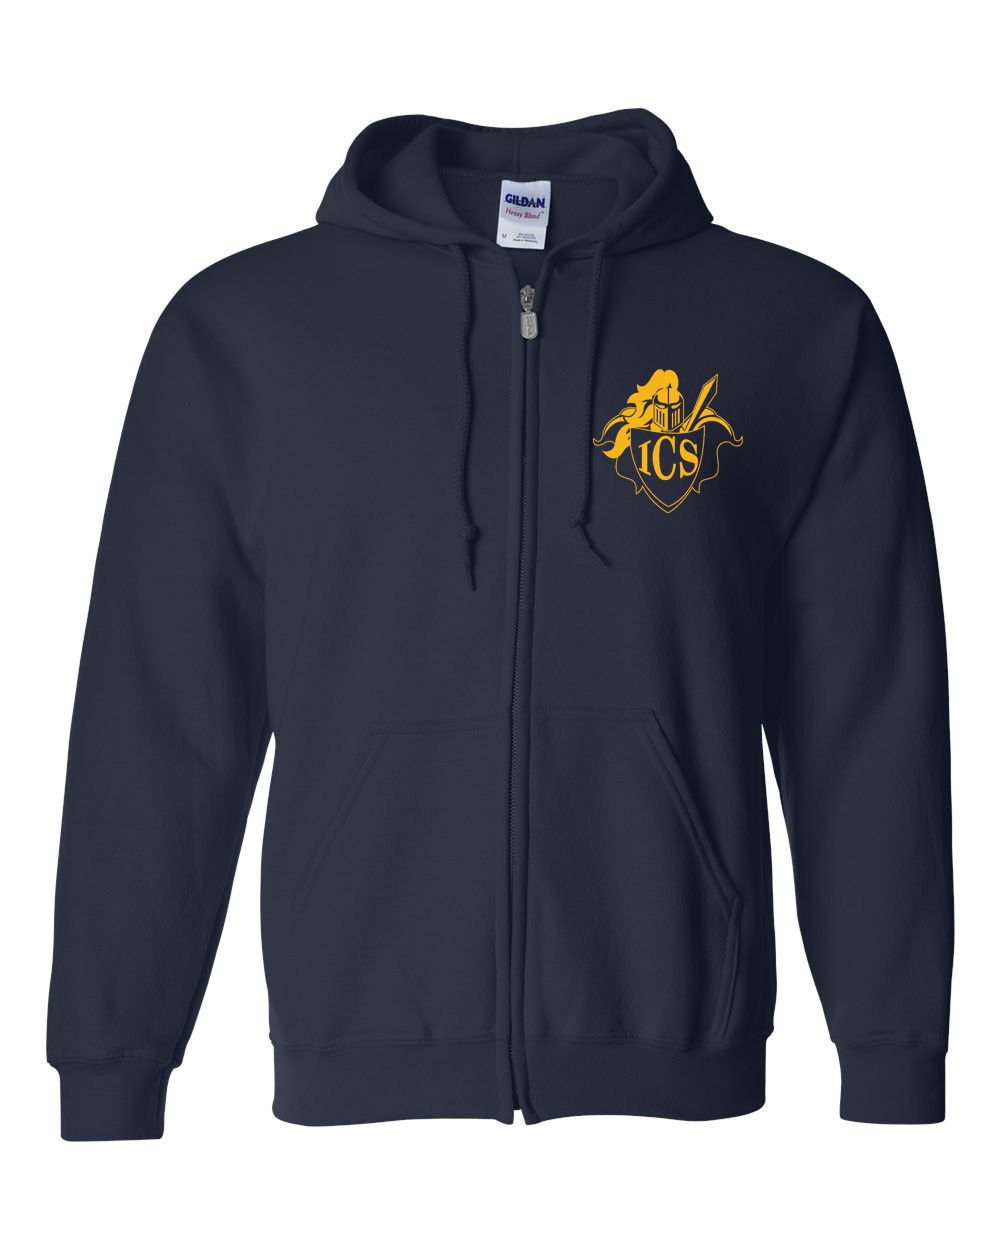 ICS Spirit Zipper Hoodie w/ Gold Logo #32 - Please allow 2-3 Weeks for Delivery